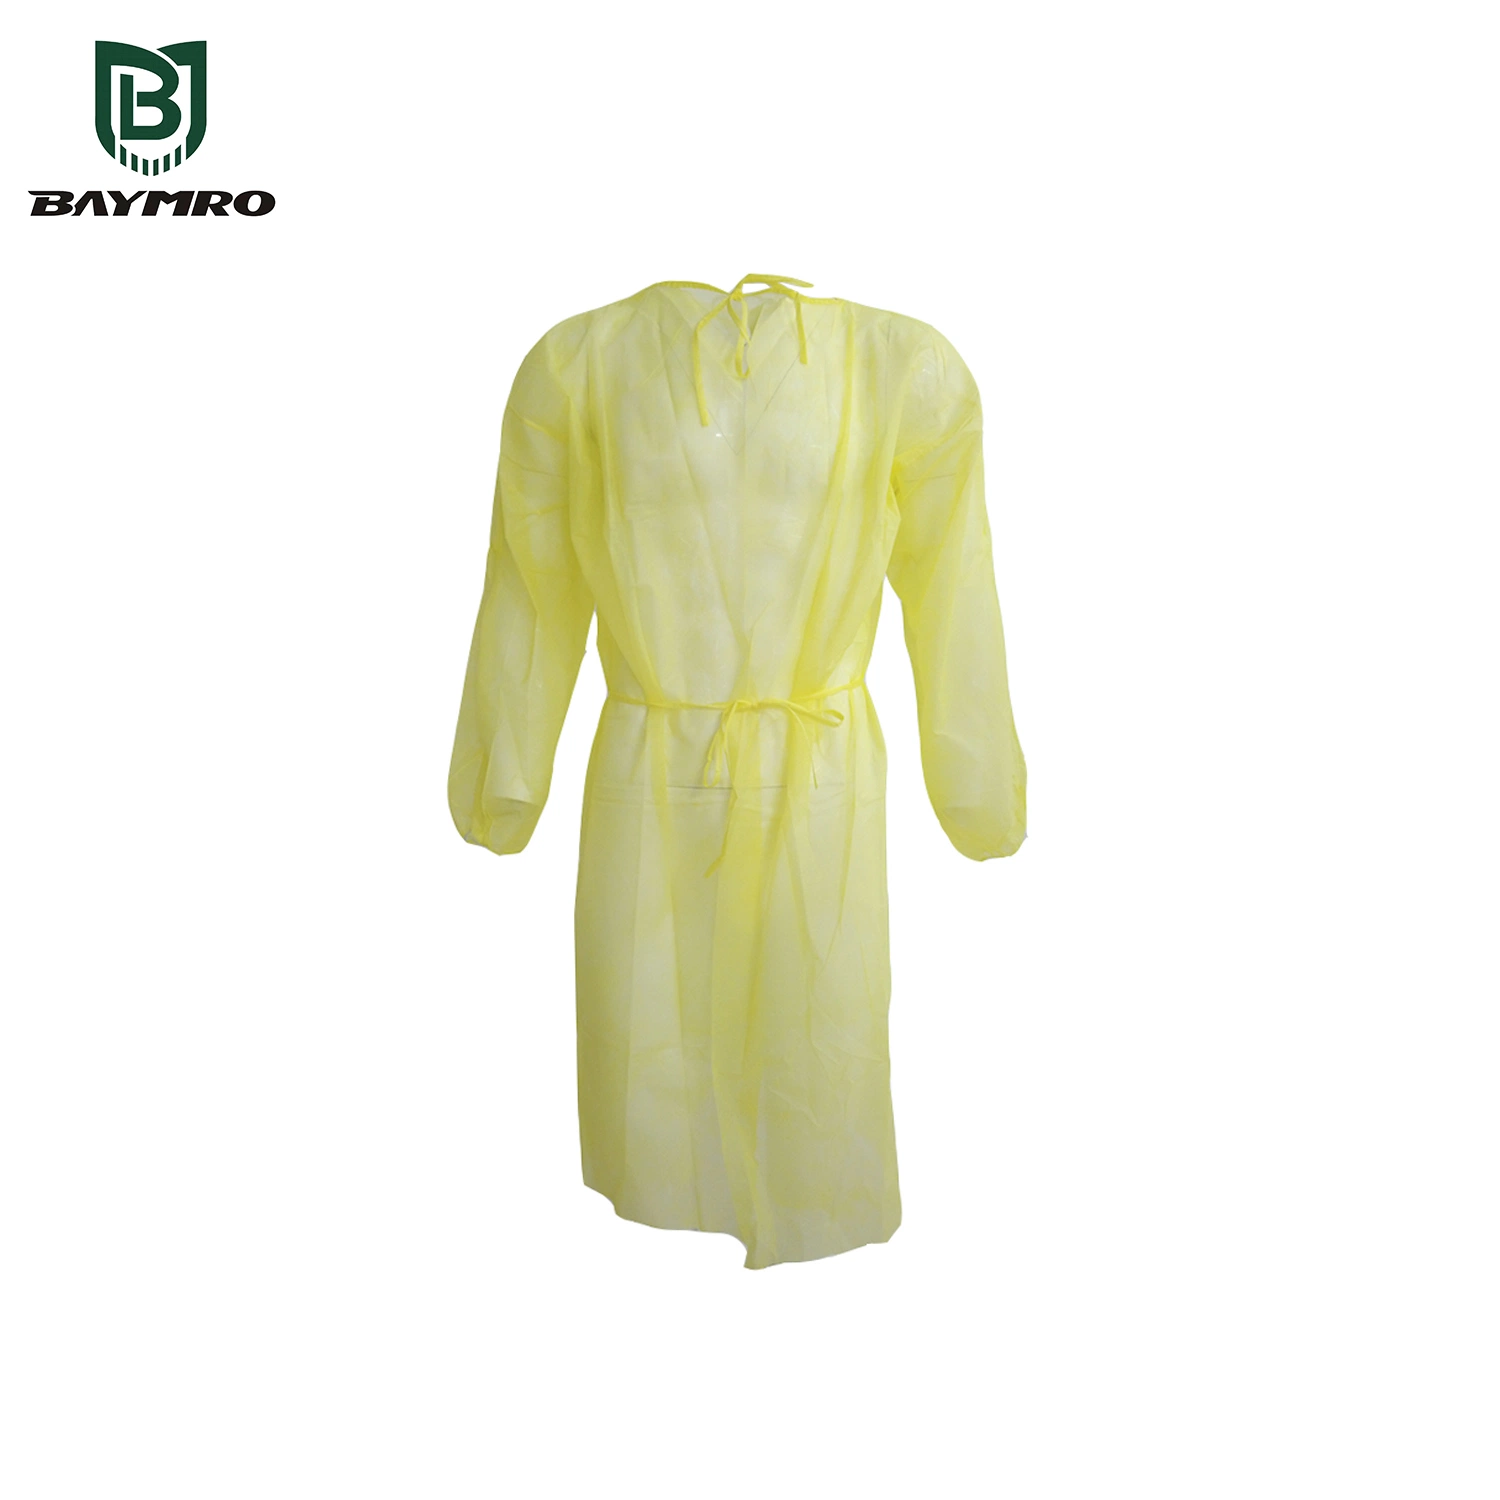 Disposable Waterproof Protective Medical Hospital Polypropylene Isolation Gown